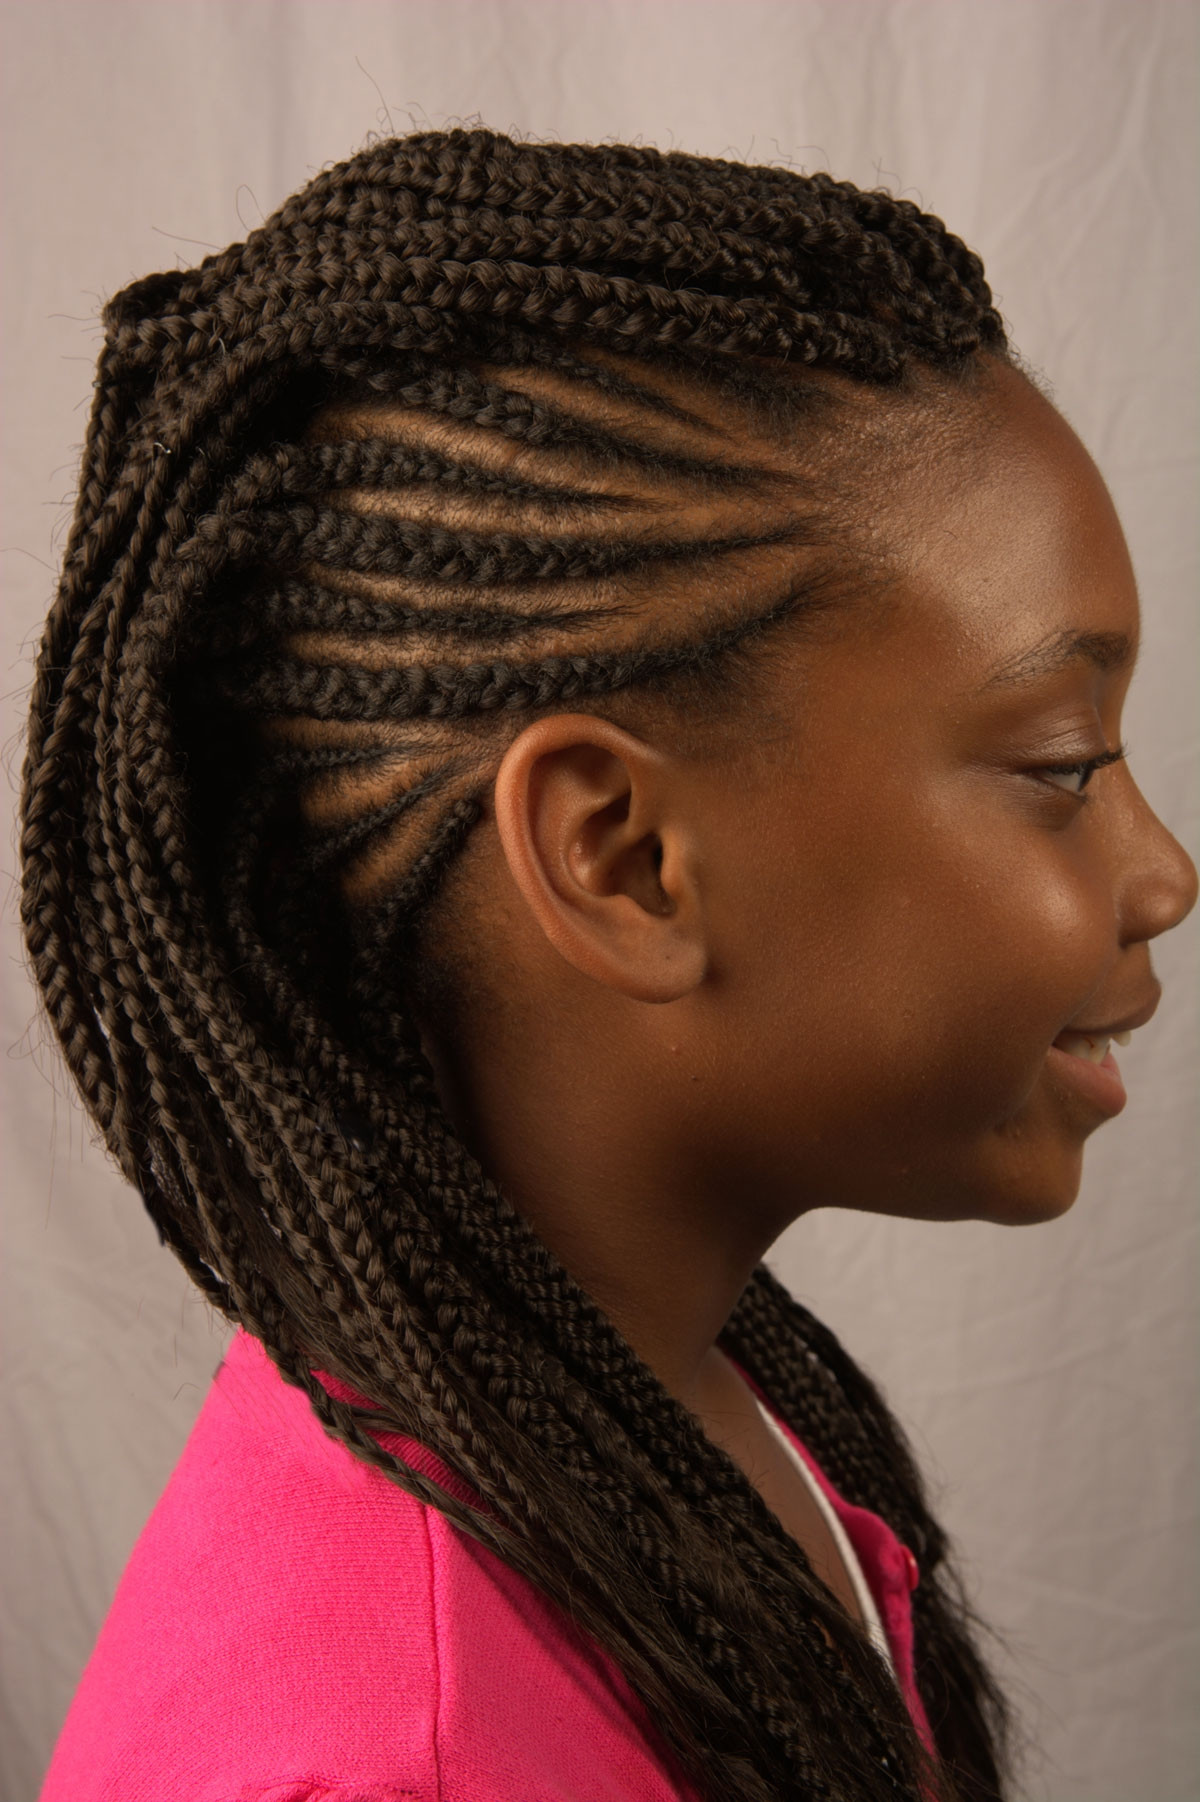 Weave Braids Hairstyles For Kids
 Cornrows With Extensions For Kids